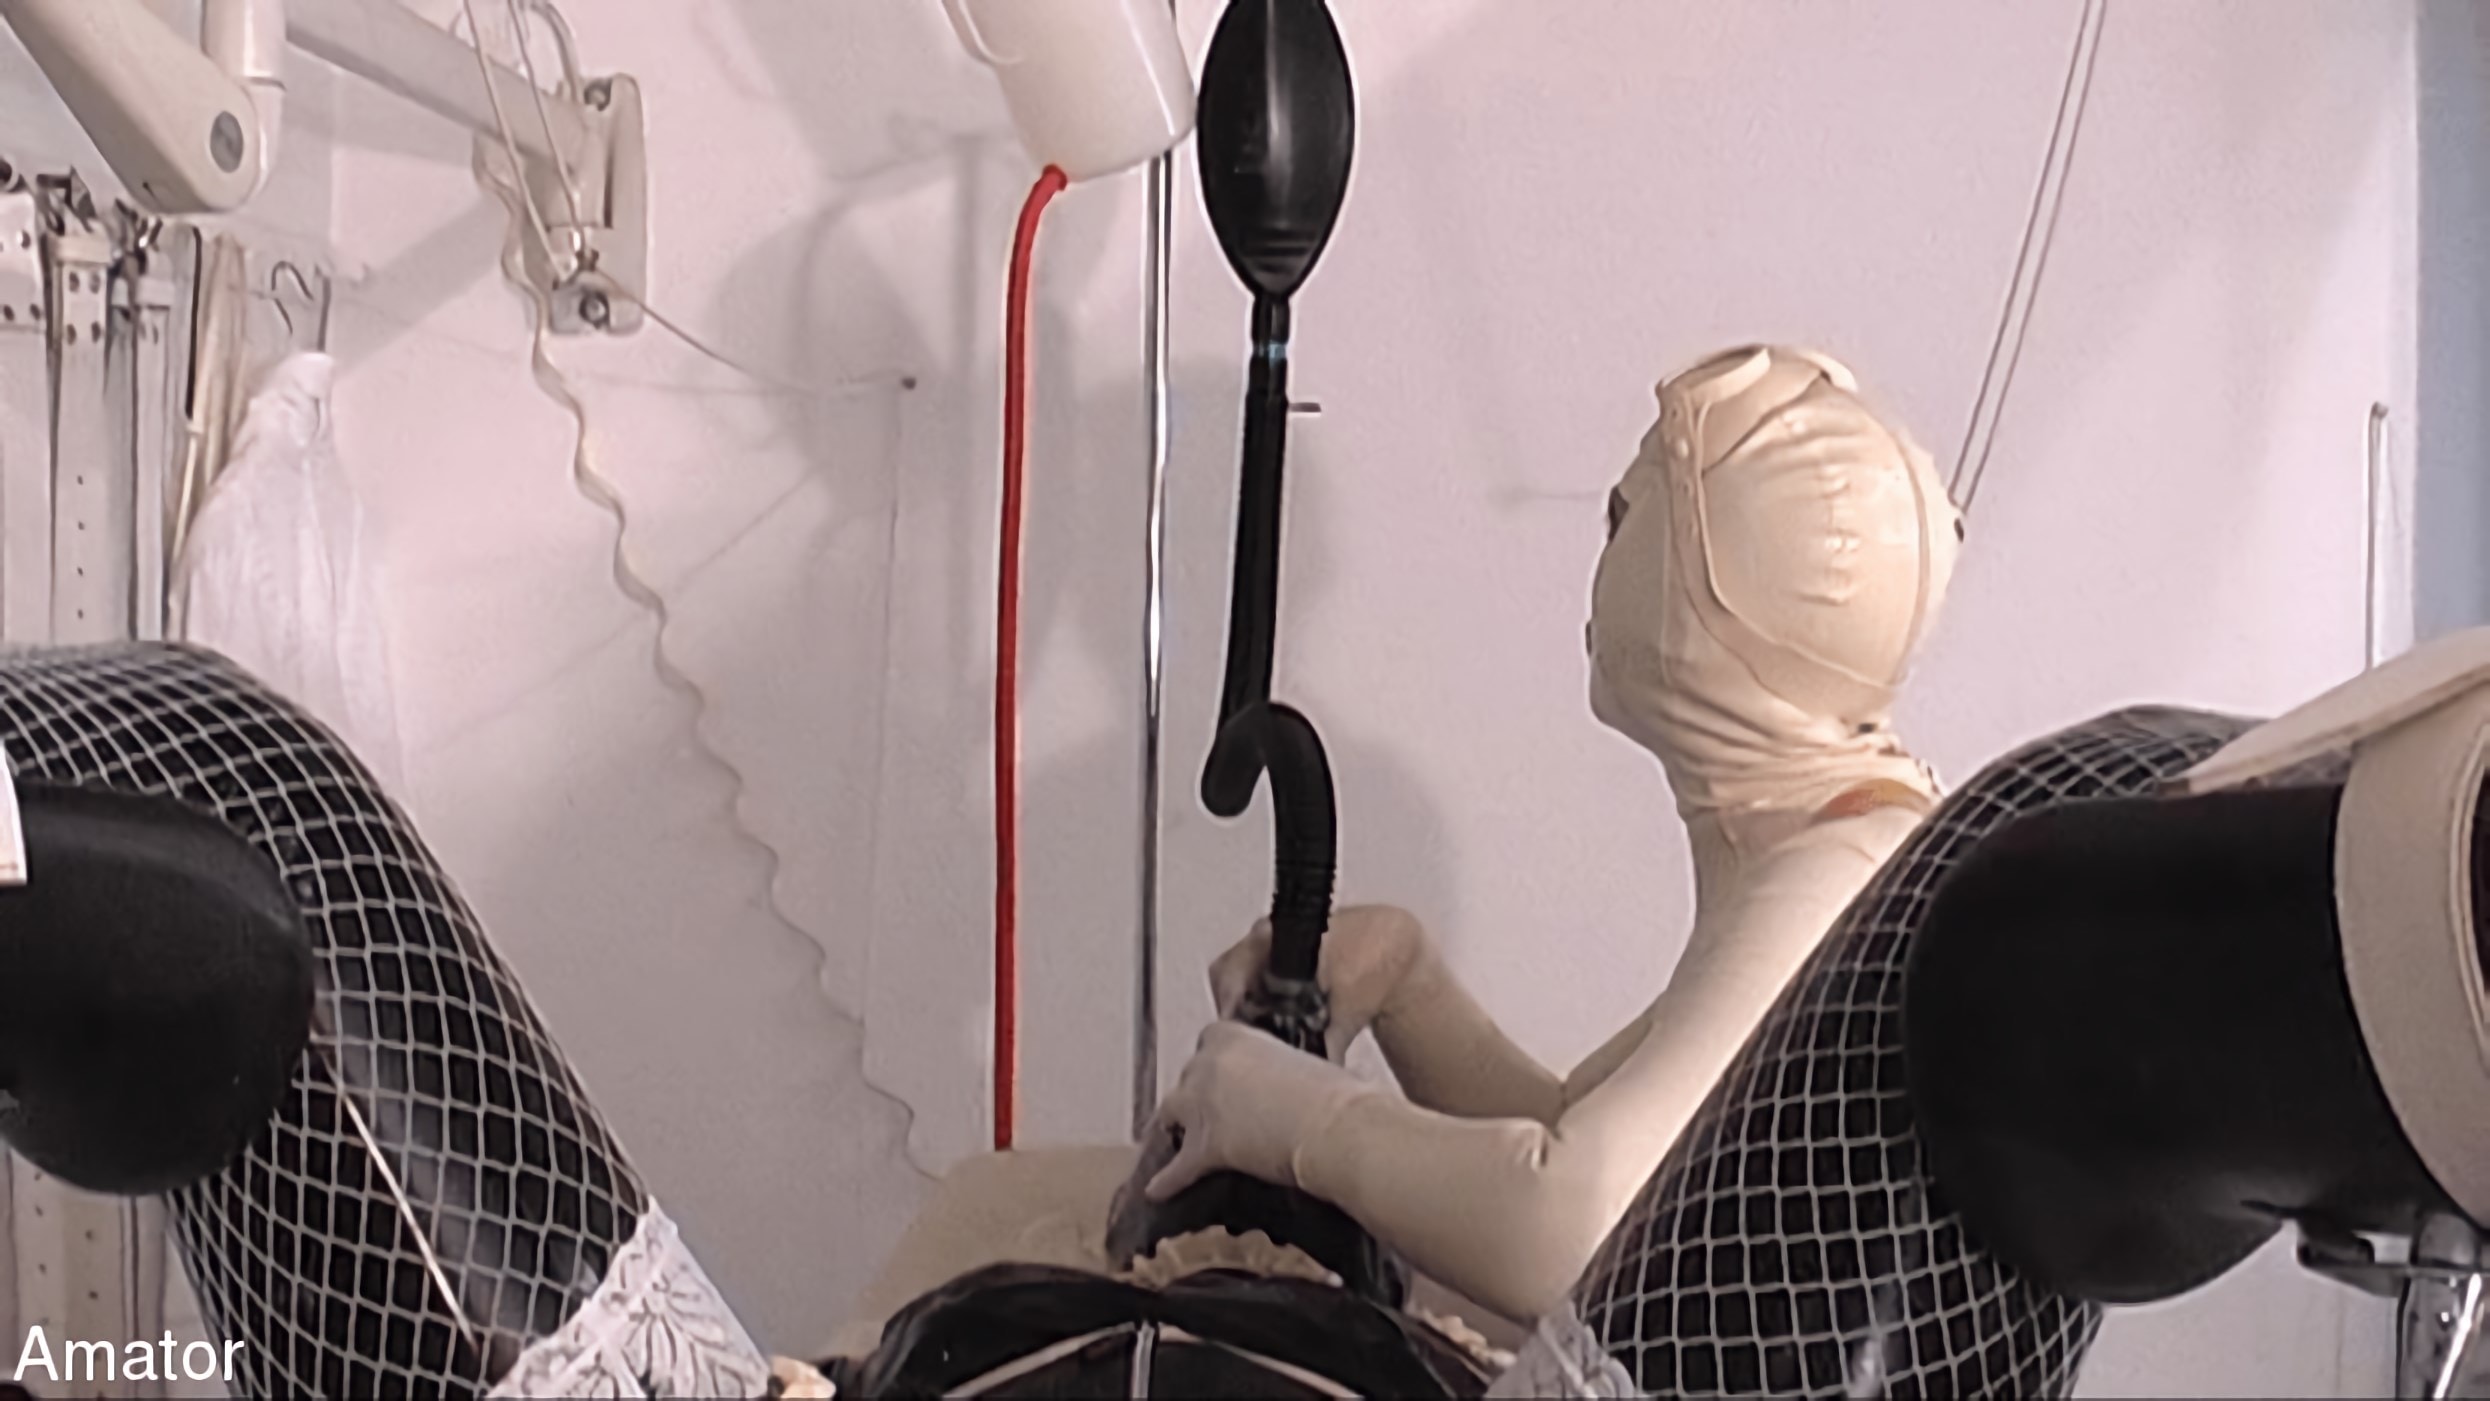 Kink Partners 'The rubber maid in the clinic part 1' starring Sklave (Photo 4)